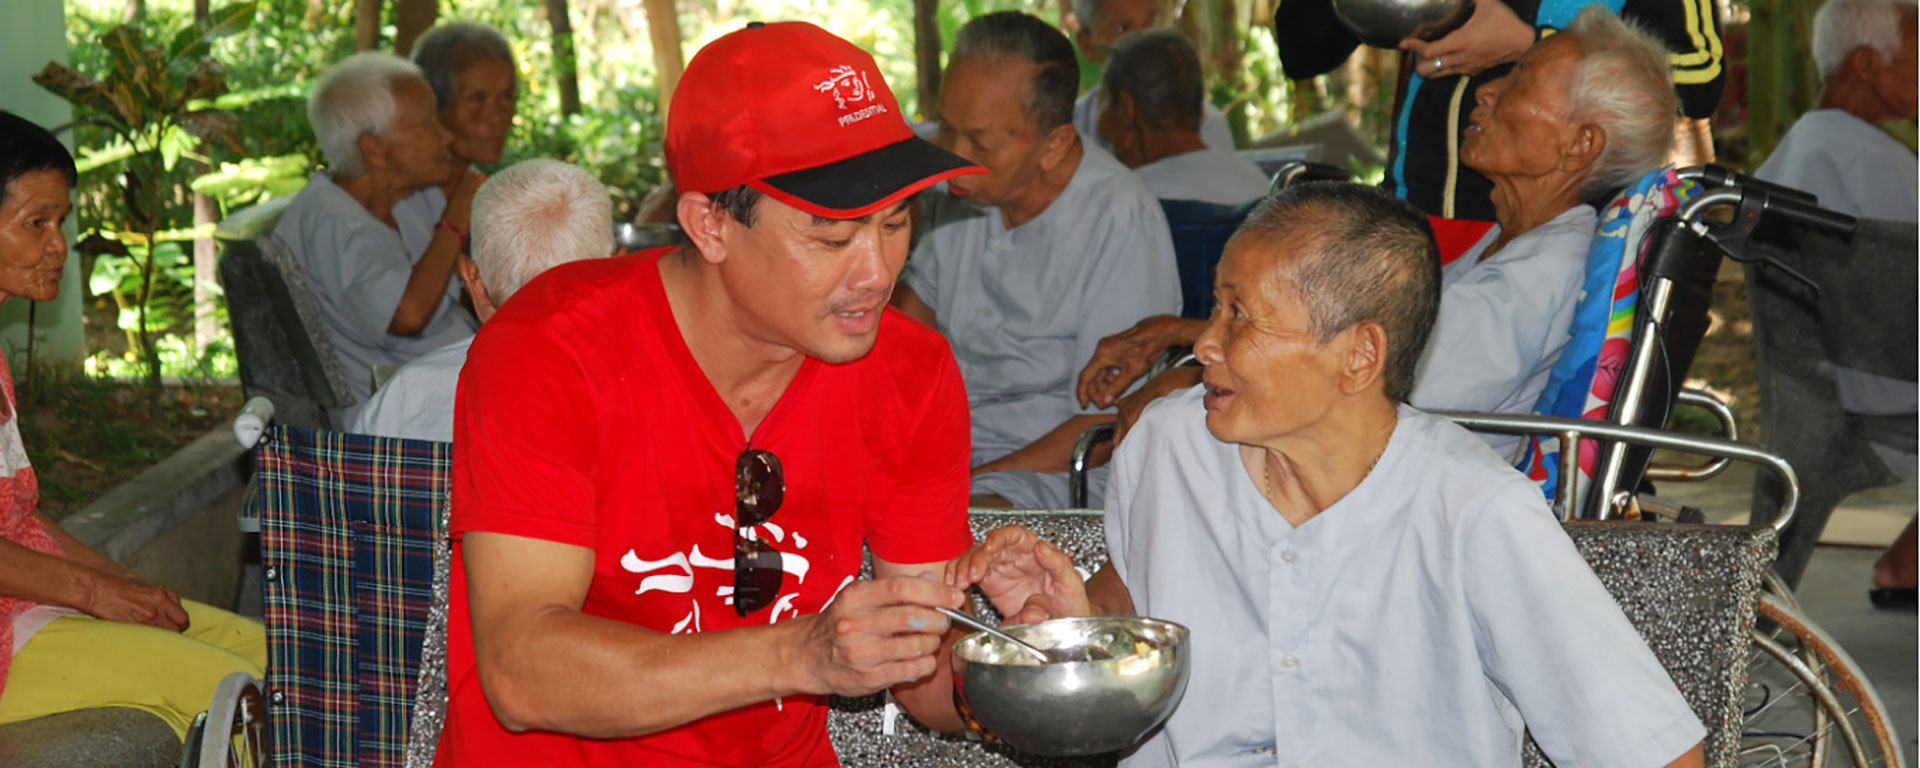 PRUVolunteer assists the elderly during a meal